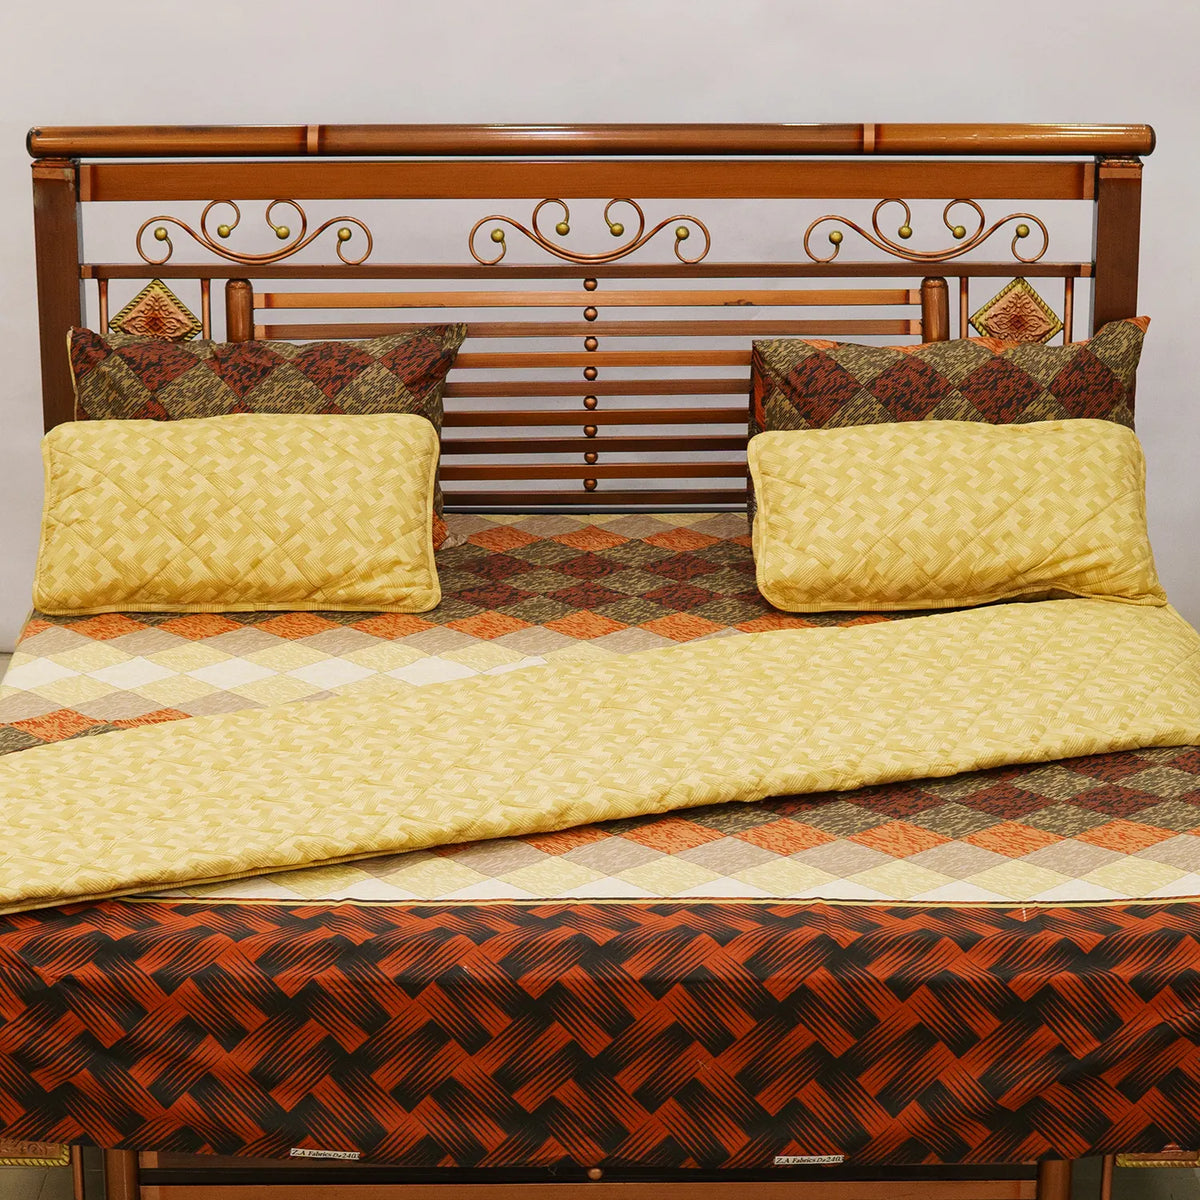 Luxurious Bed Sheet Set with Pillow Covers: Transform Your Bedroom into a Haven of Comfort